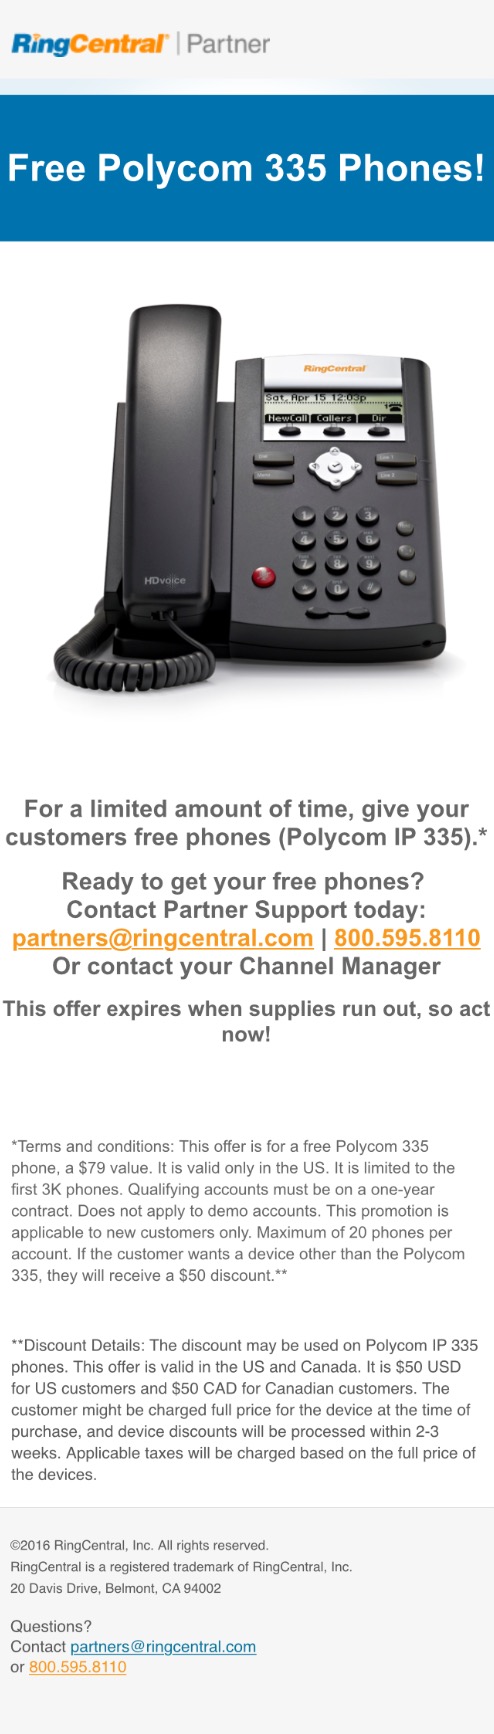 RINGCENTRAL_112916